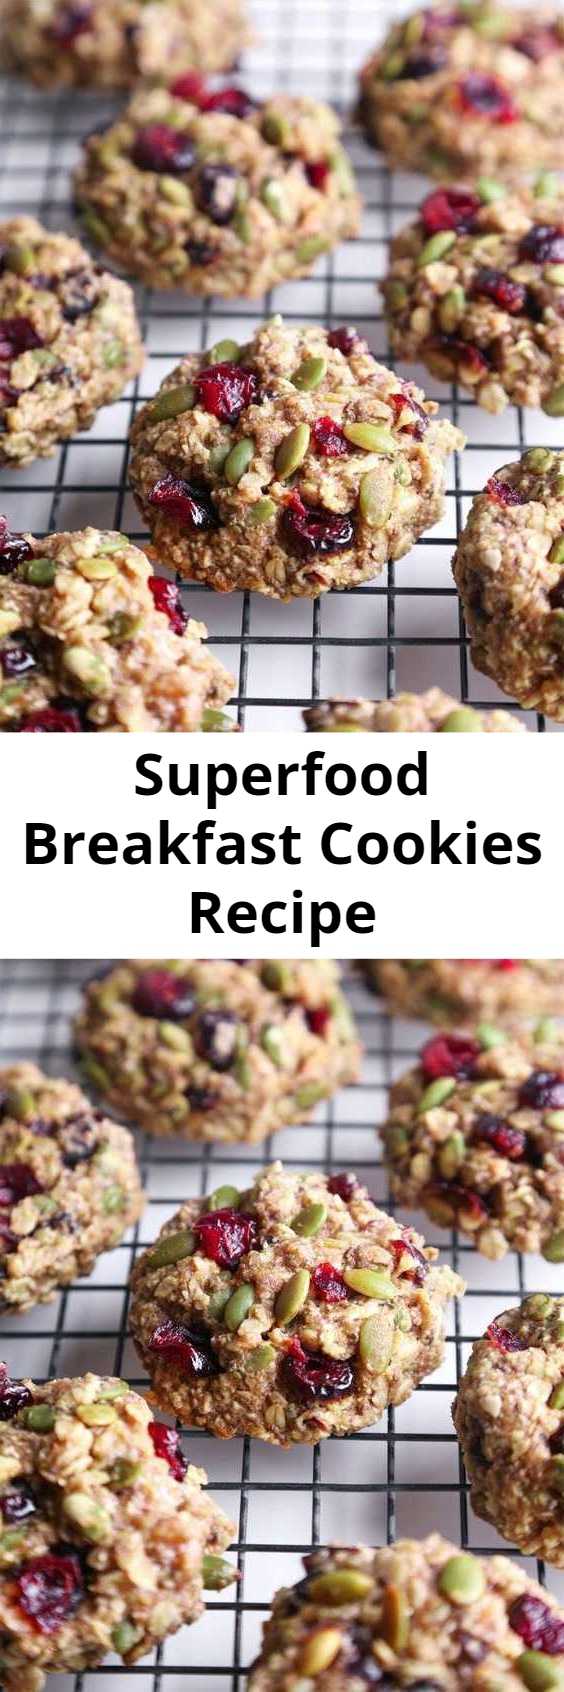 Superfood Breakfast Cookies Recipe - These cookies are jam-packed with nutritious ingredients and healthy enough for breakfast on the go! They're free of gluten, dairy, & refined sugar, and also vegan friendly!